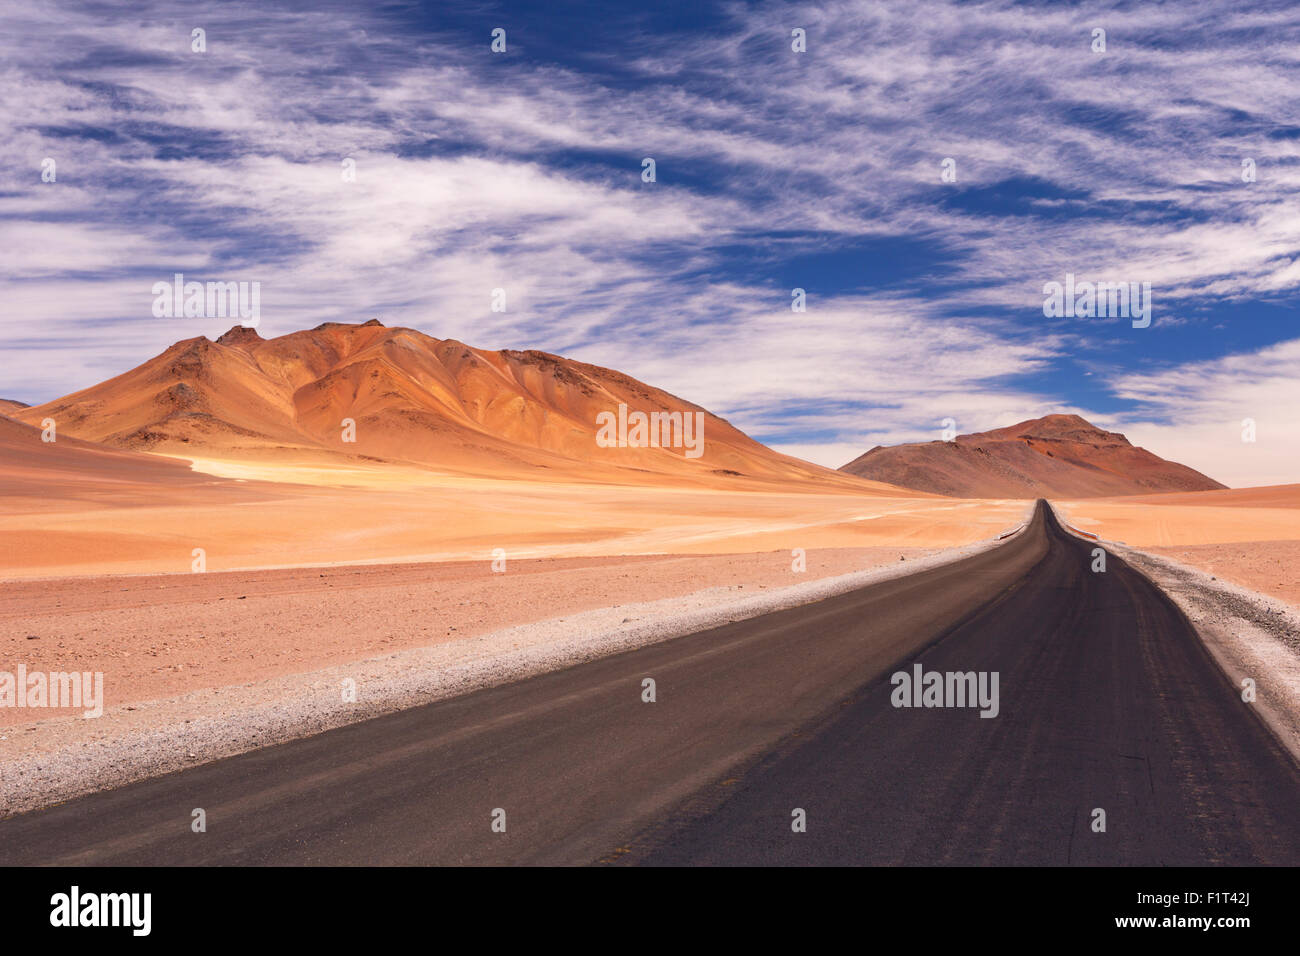 A high desert road through the Chilean Altiplano at an altitude of 4700m. Stock Photo